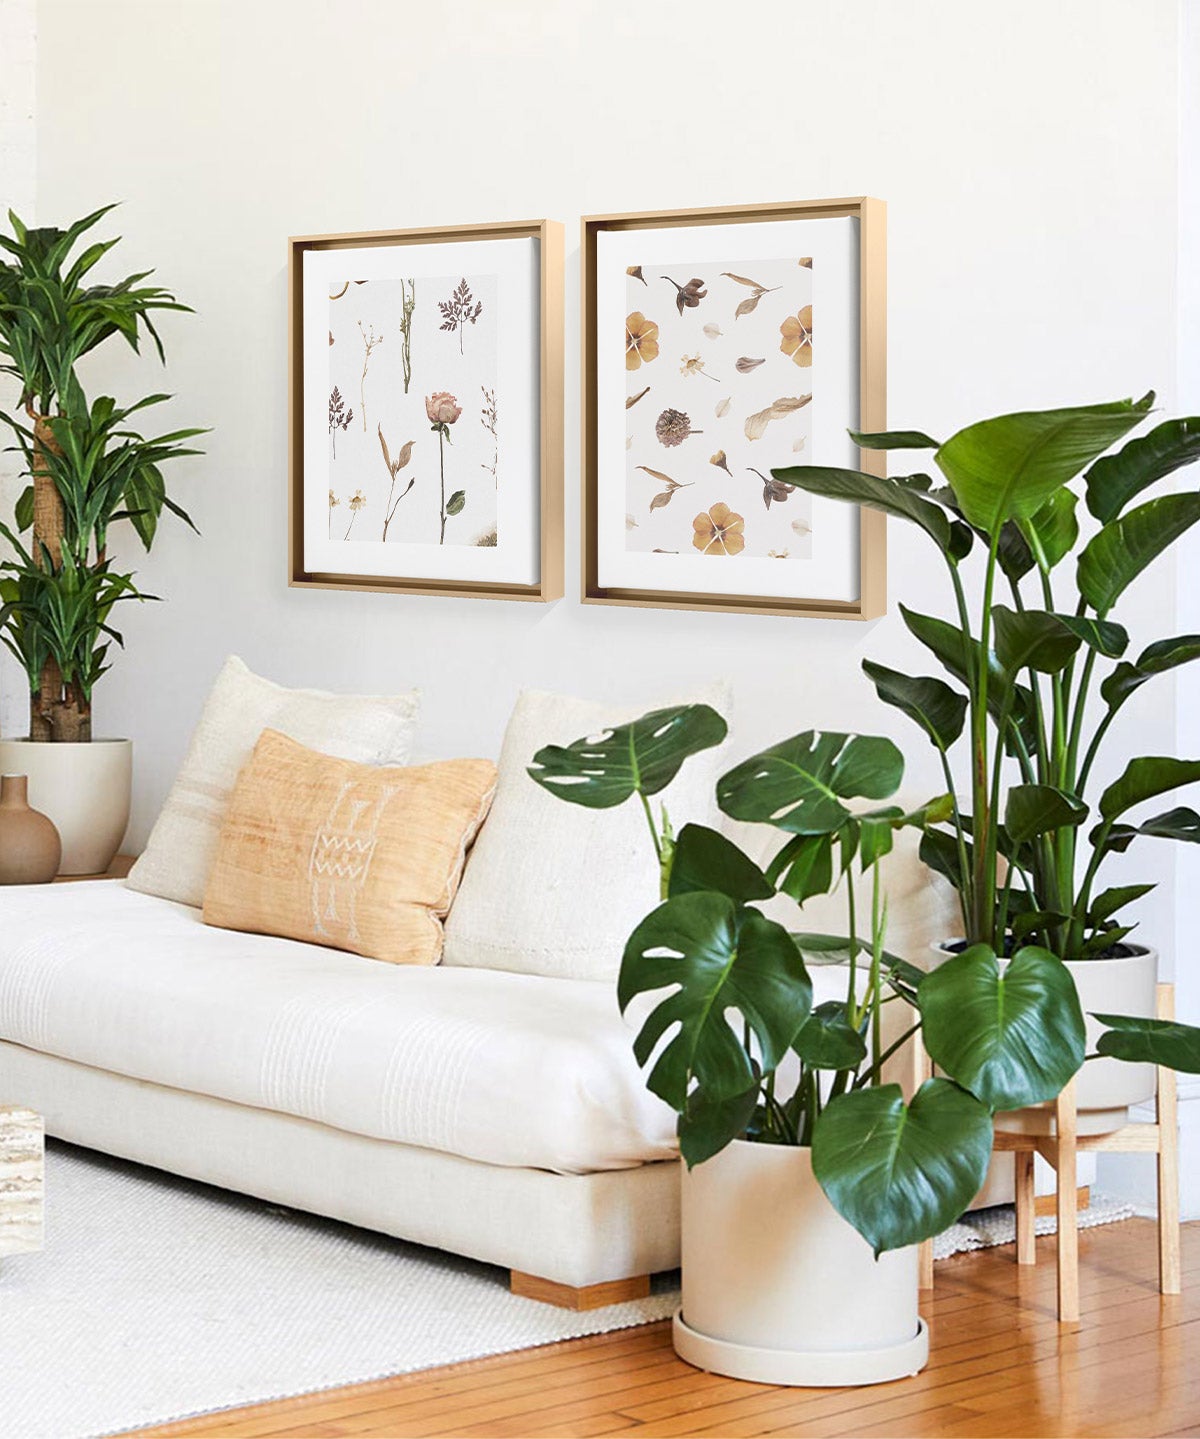 Artifact Uprising Framed Canvas Prints of dried botanicals hanging above white couch surrounded by plants